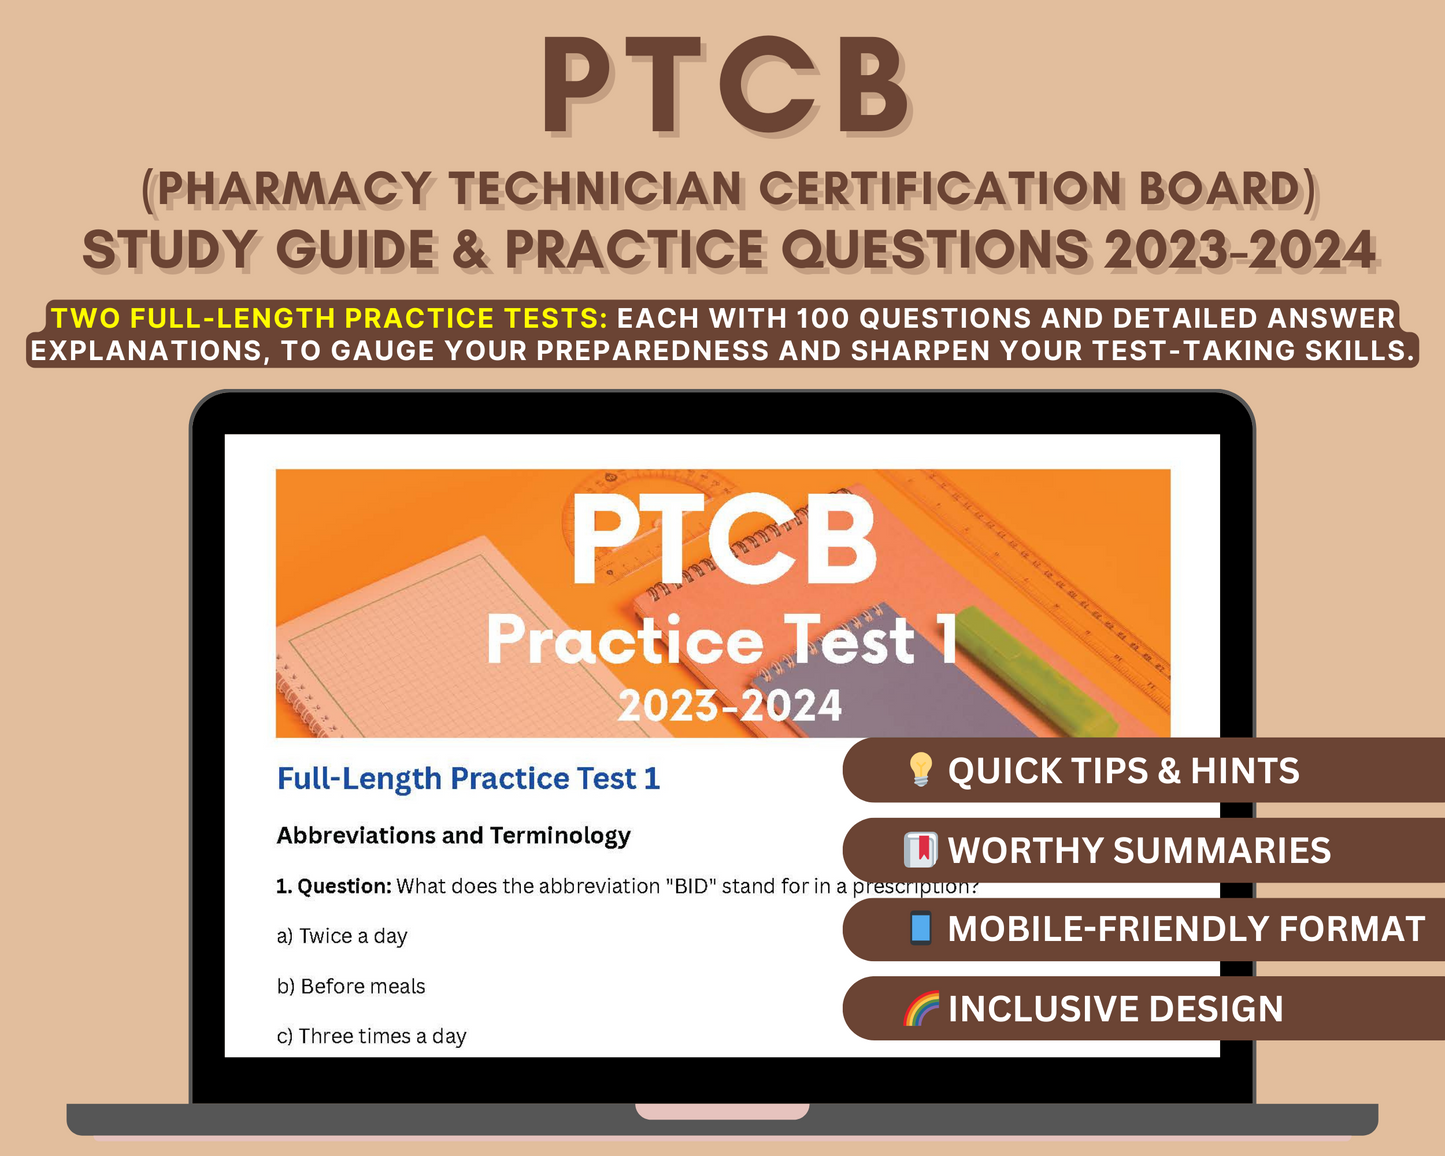 PTCB Study Guide 2023–24: Ultimate Guide to Pharmacy Technician Certification | In-Depth Content Review & Practice Tests